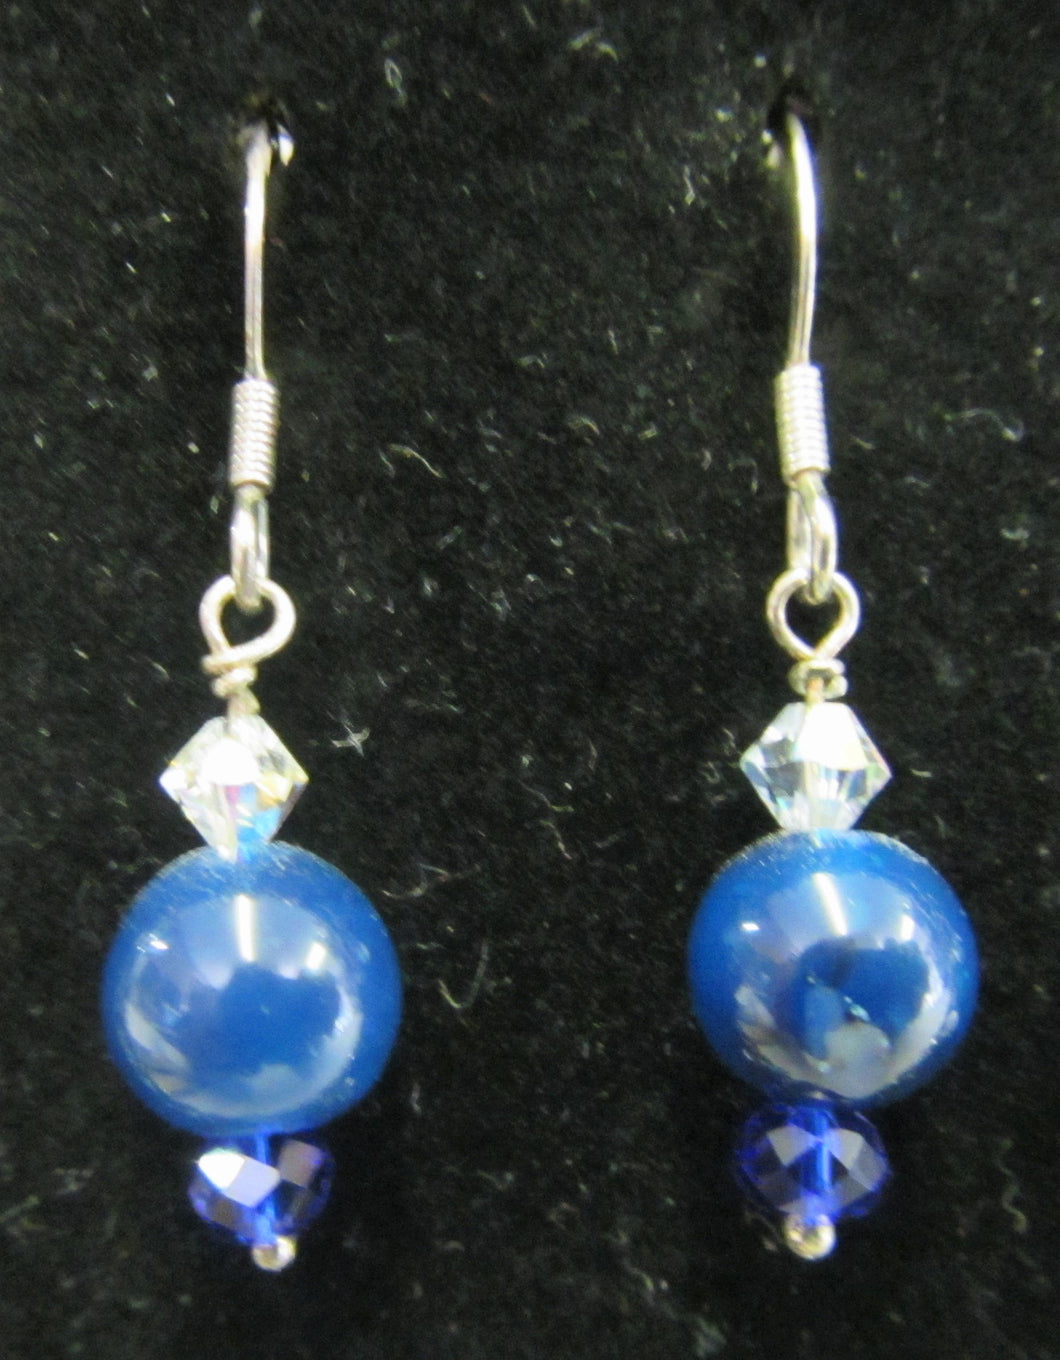 Handcrafted sterling silver semi precious stone earrings